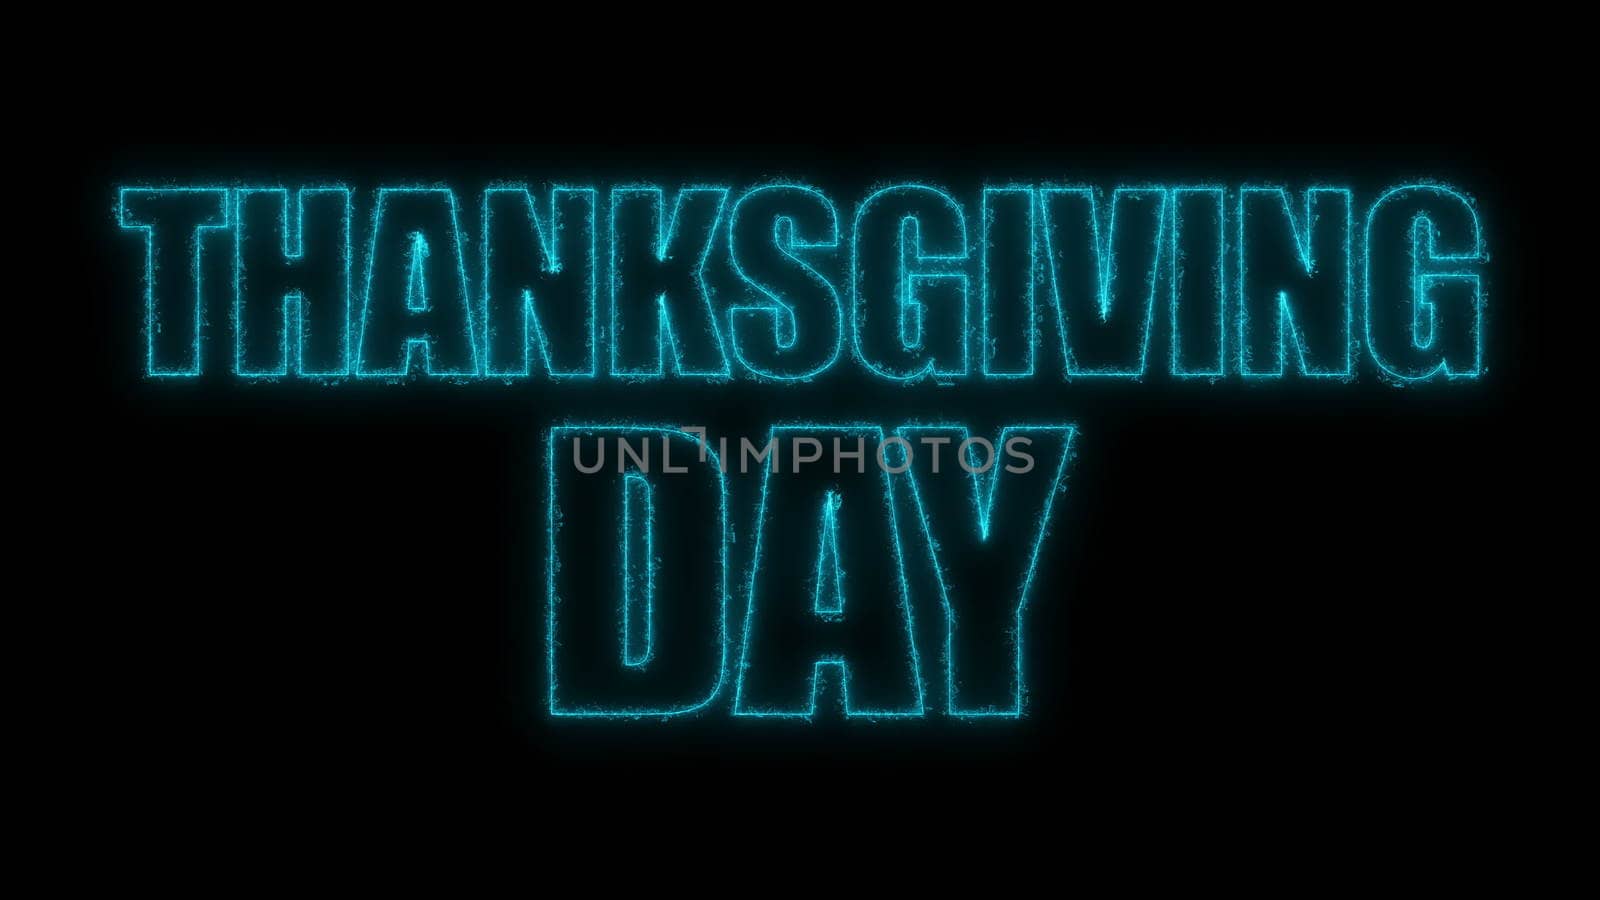 Thanks giving day text, 3d rendering background, computer generating, can be used for holidays festive design